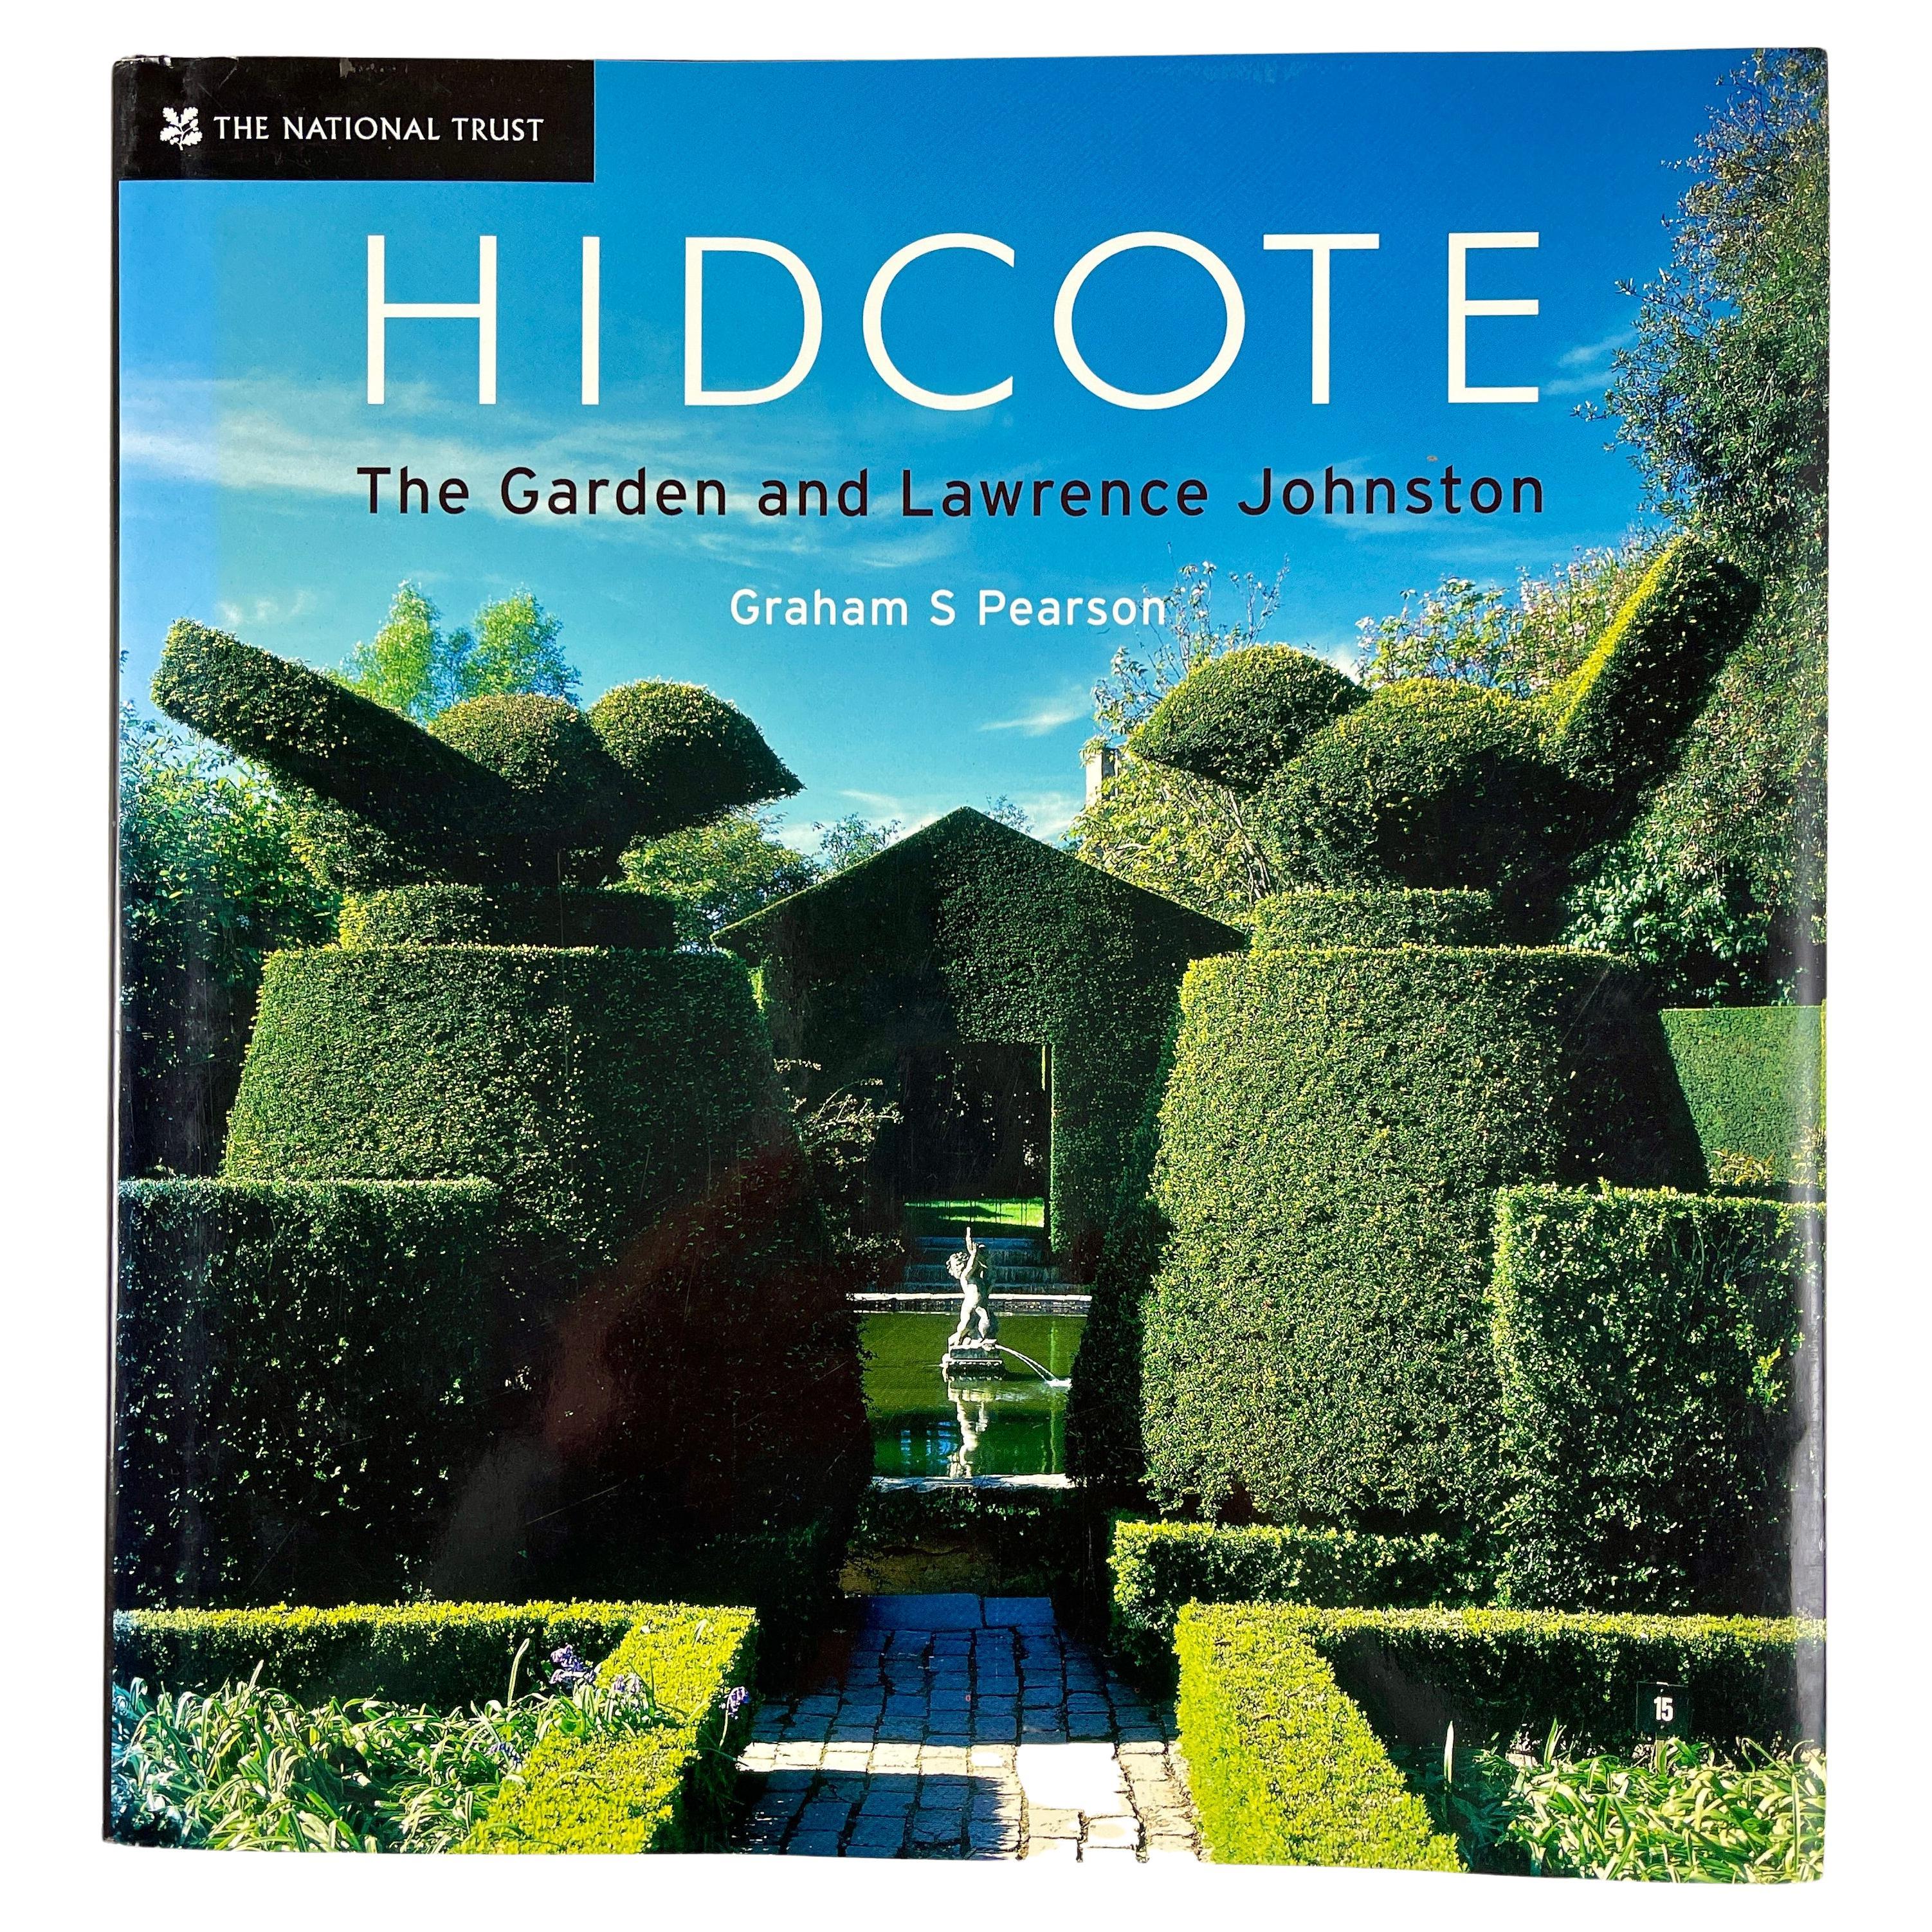 Hidcote the Garden and Lawrence Johnston, National Trust Book